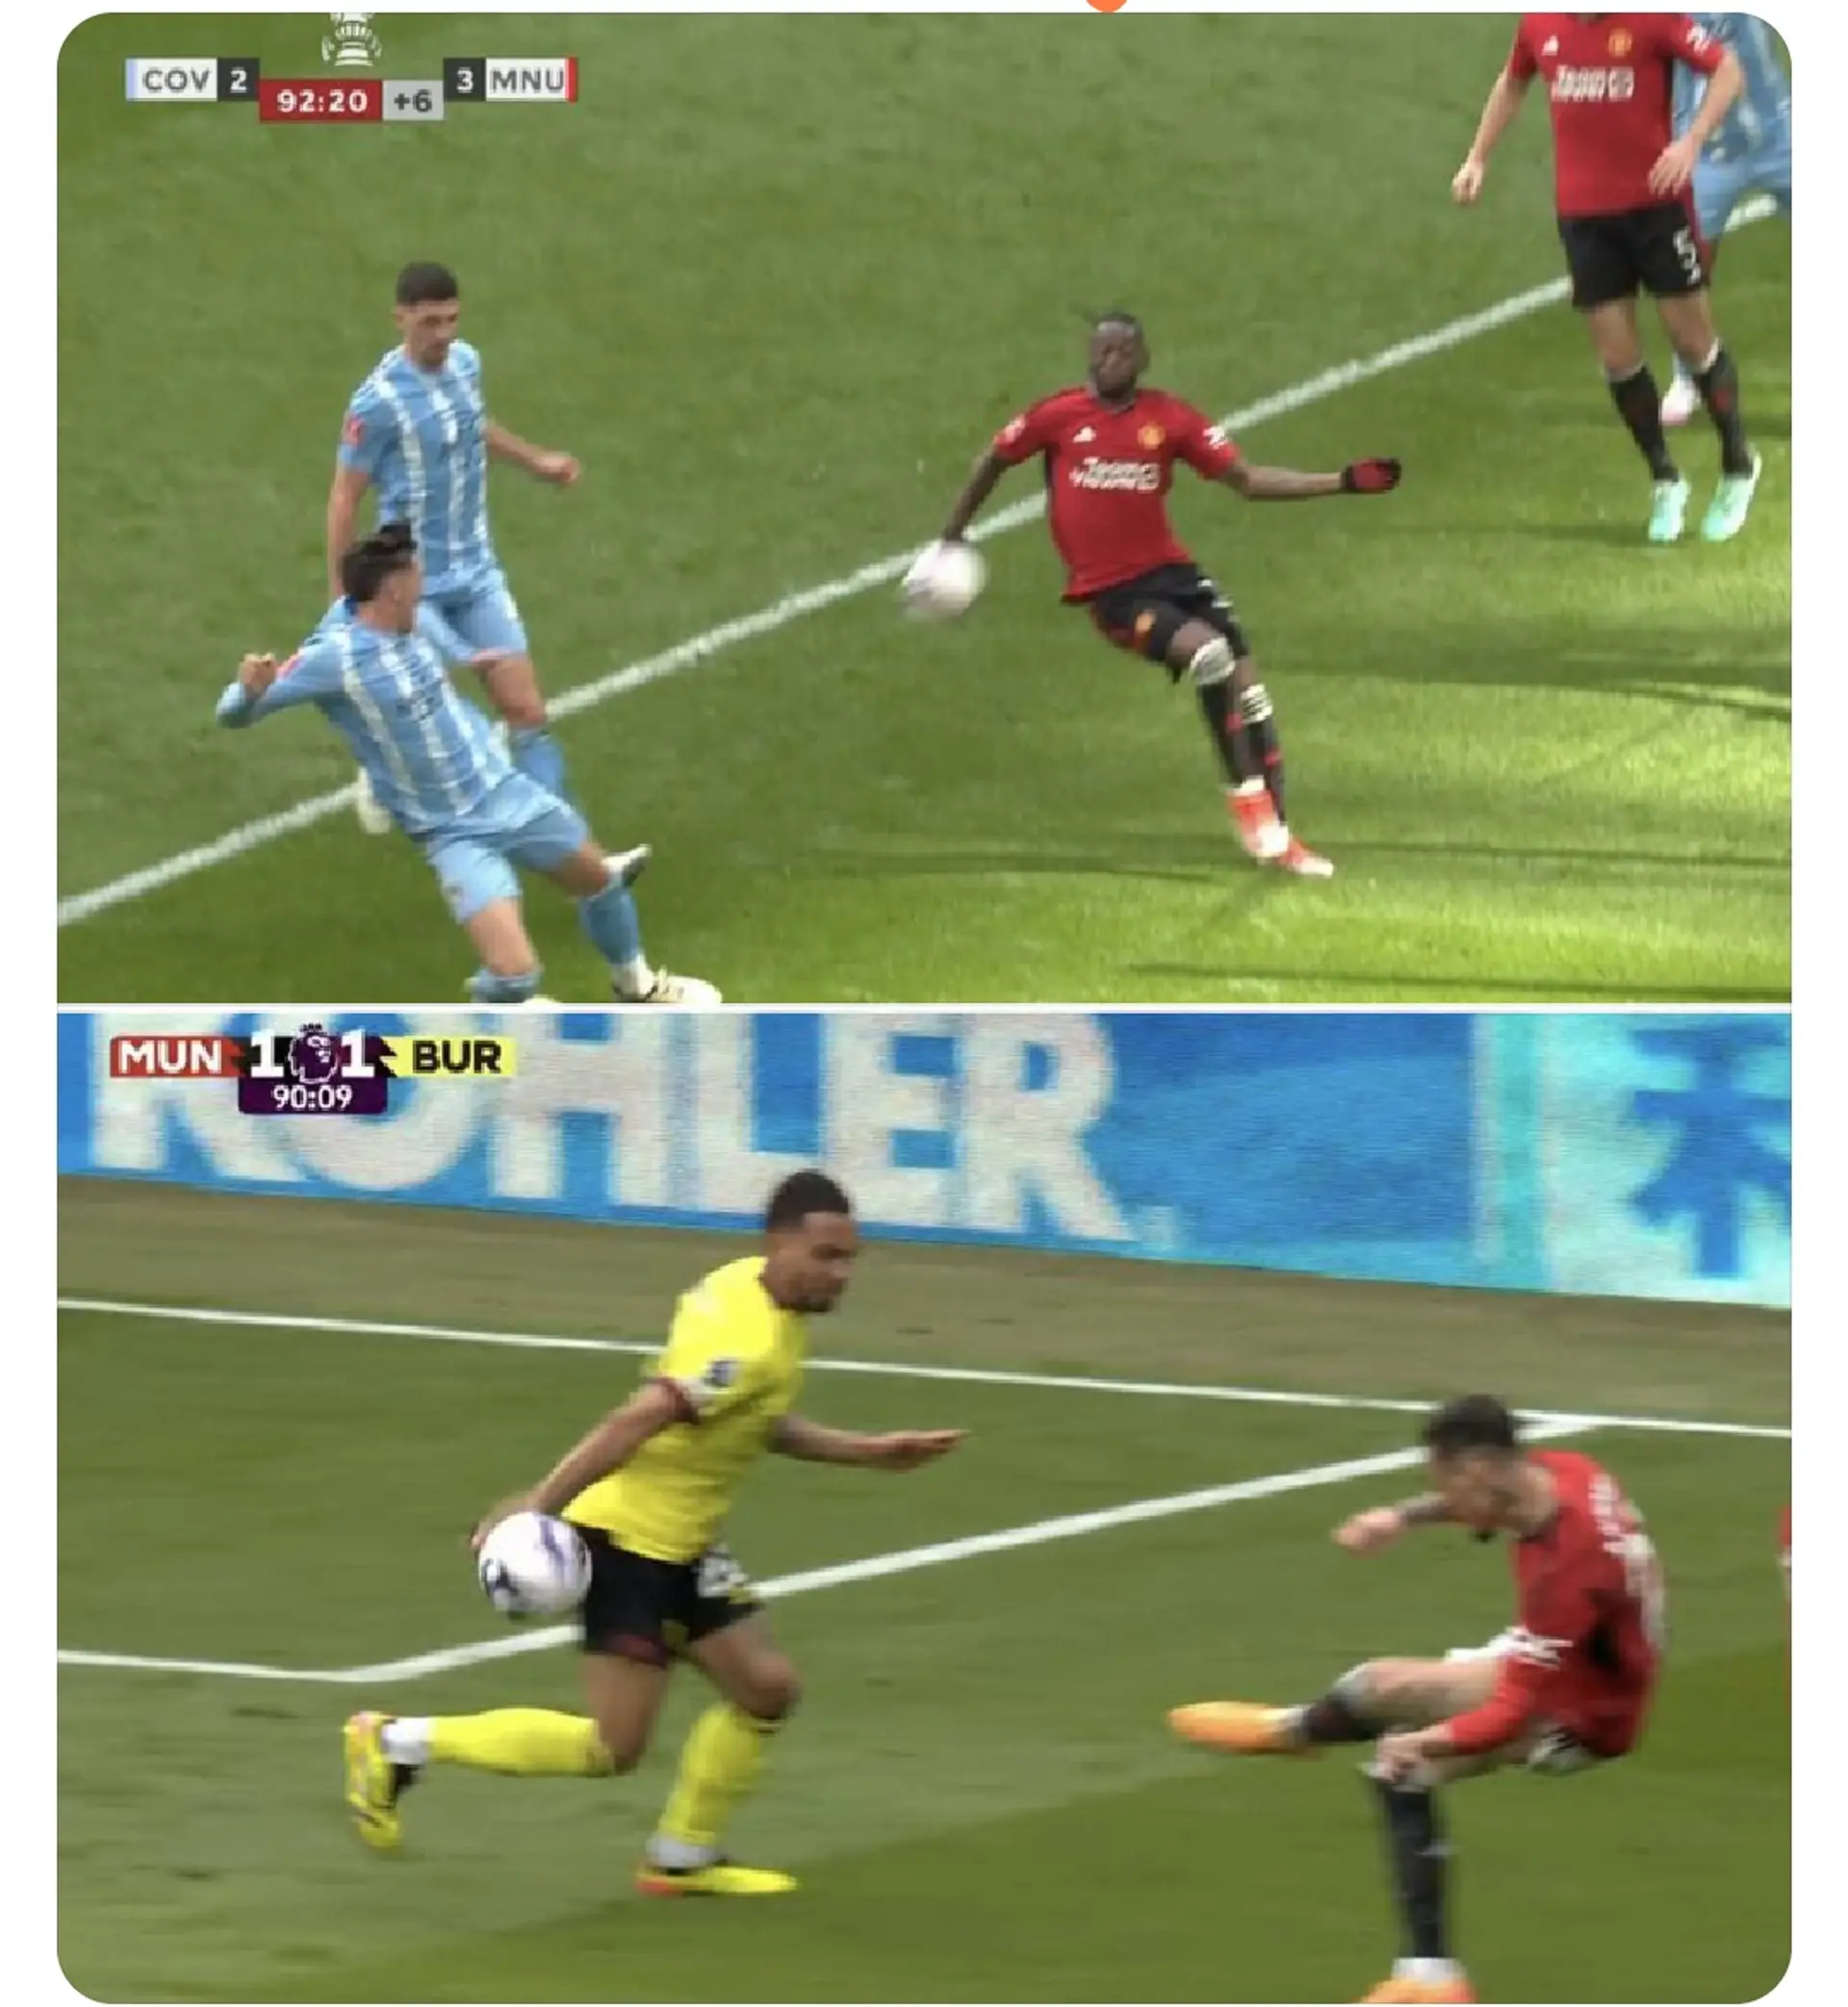 VAR inconsistency continues against United 🤬😤🤬😤